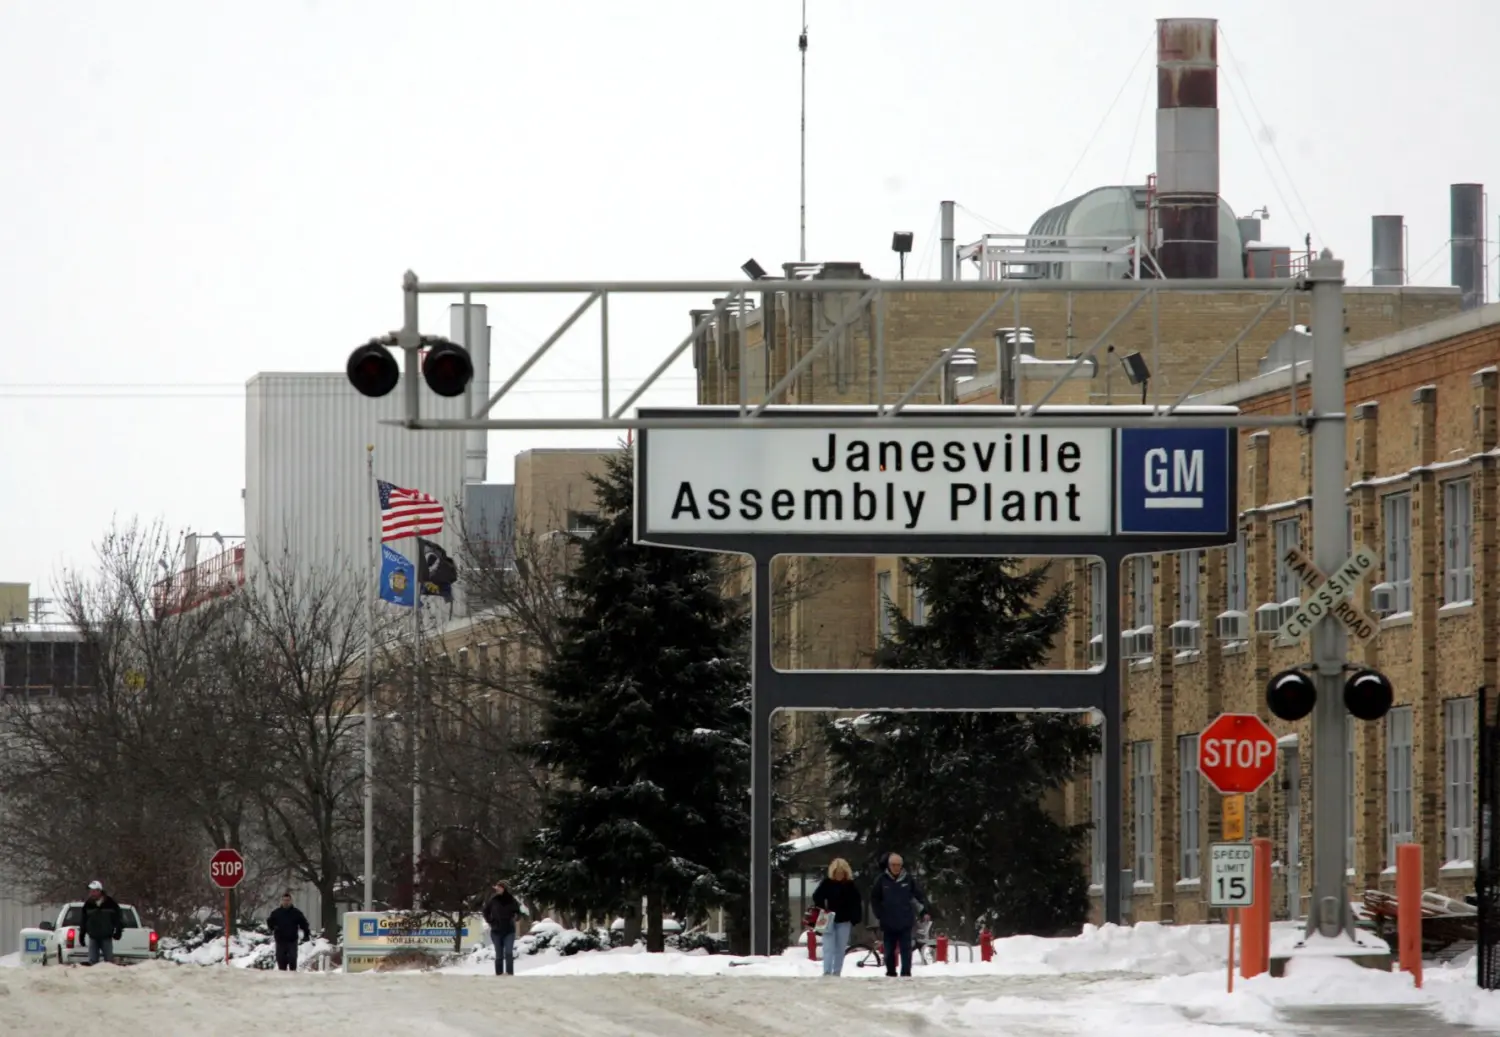 Workers leave the GM plant in Janesville, Wisconsin, after the last vehicle, a black Chevy Tahoe, rolled off the assembly line December 23, 2008 after manufacturing trucks, automobiles, SUVs, and tractors since 1919.